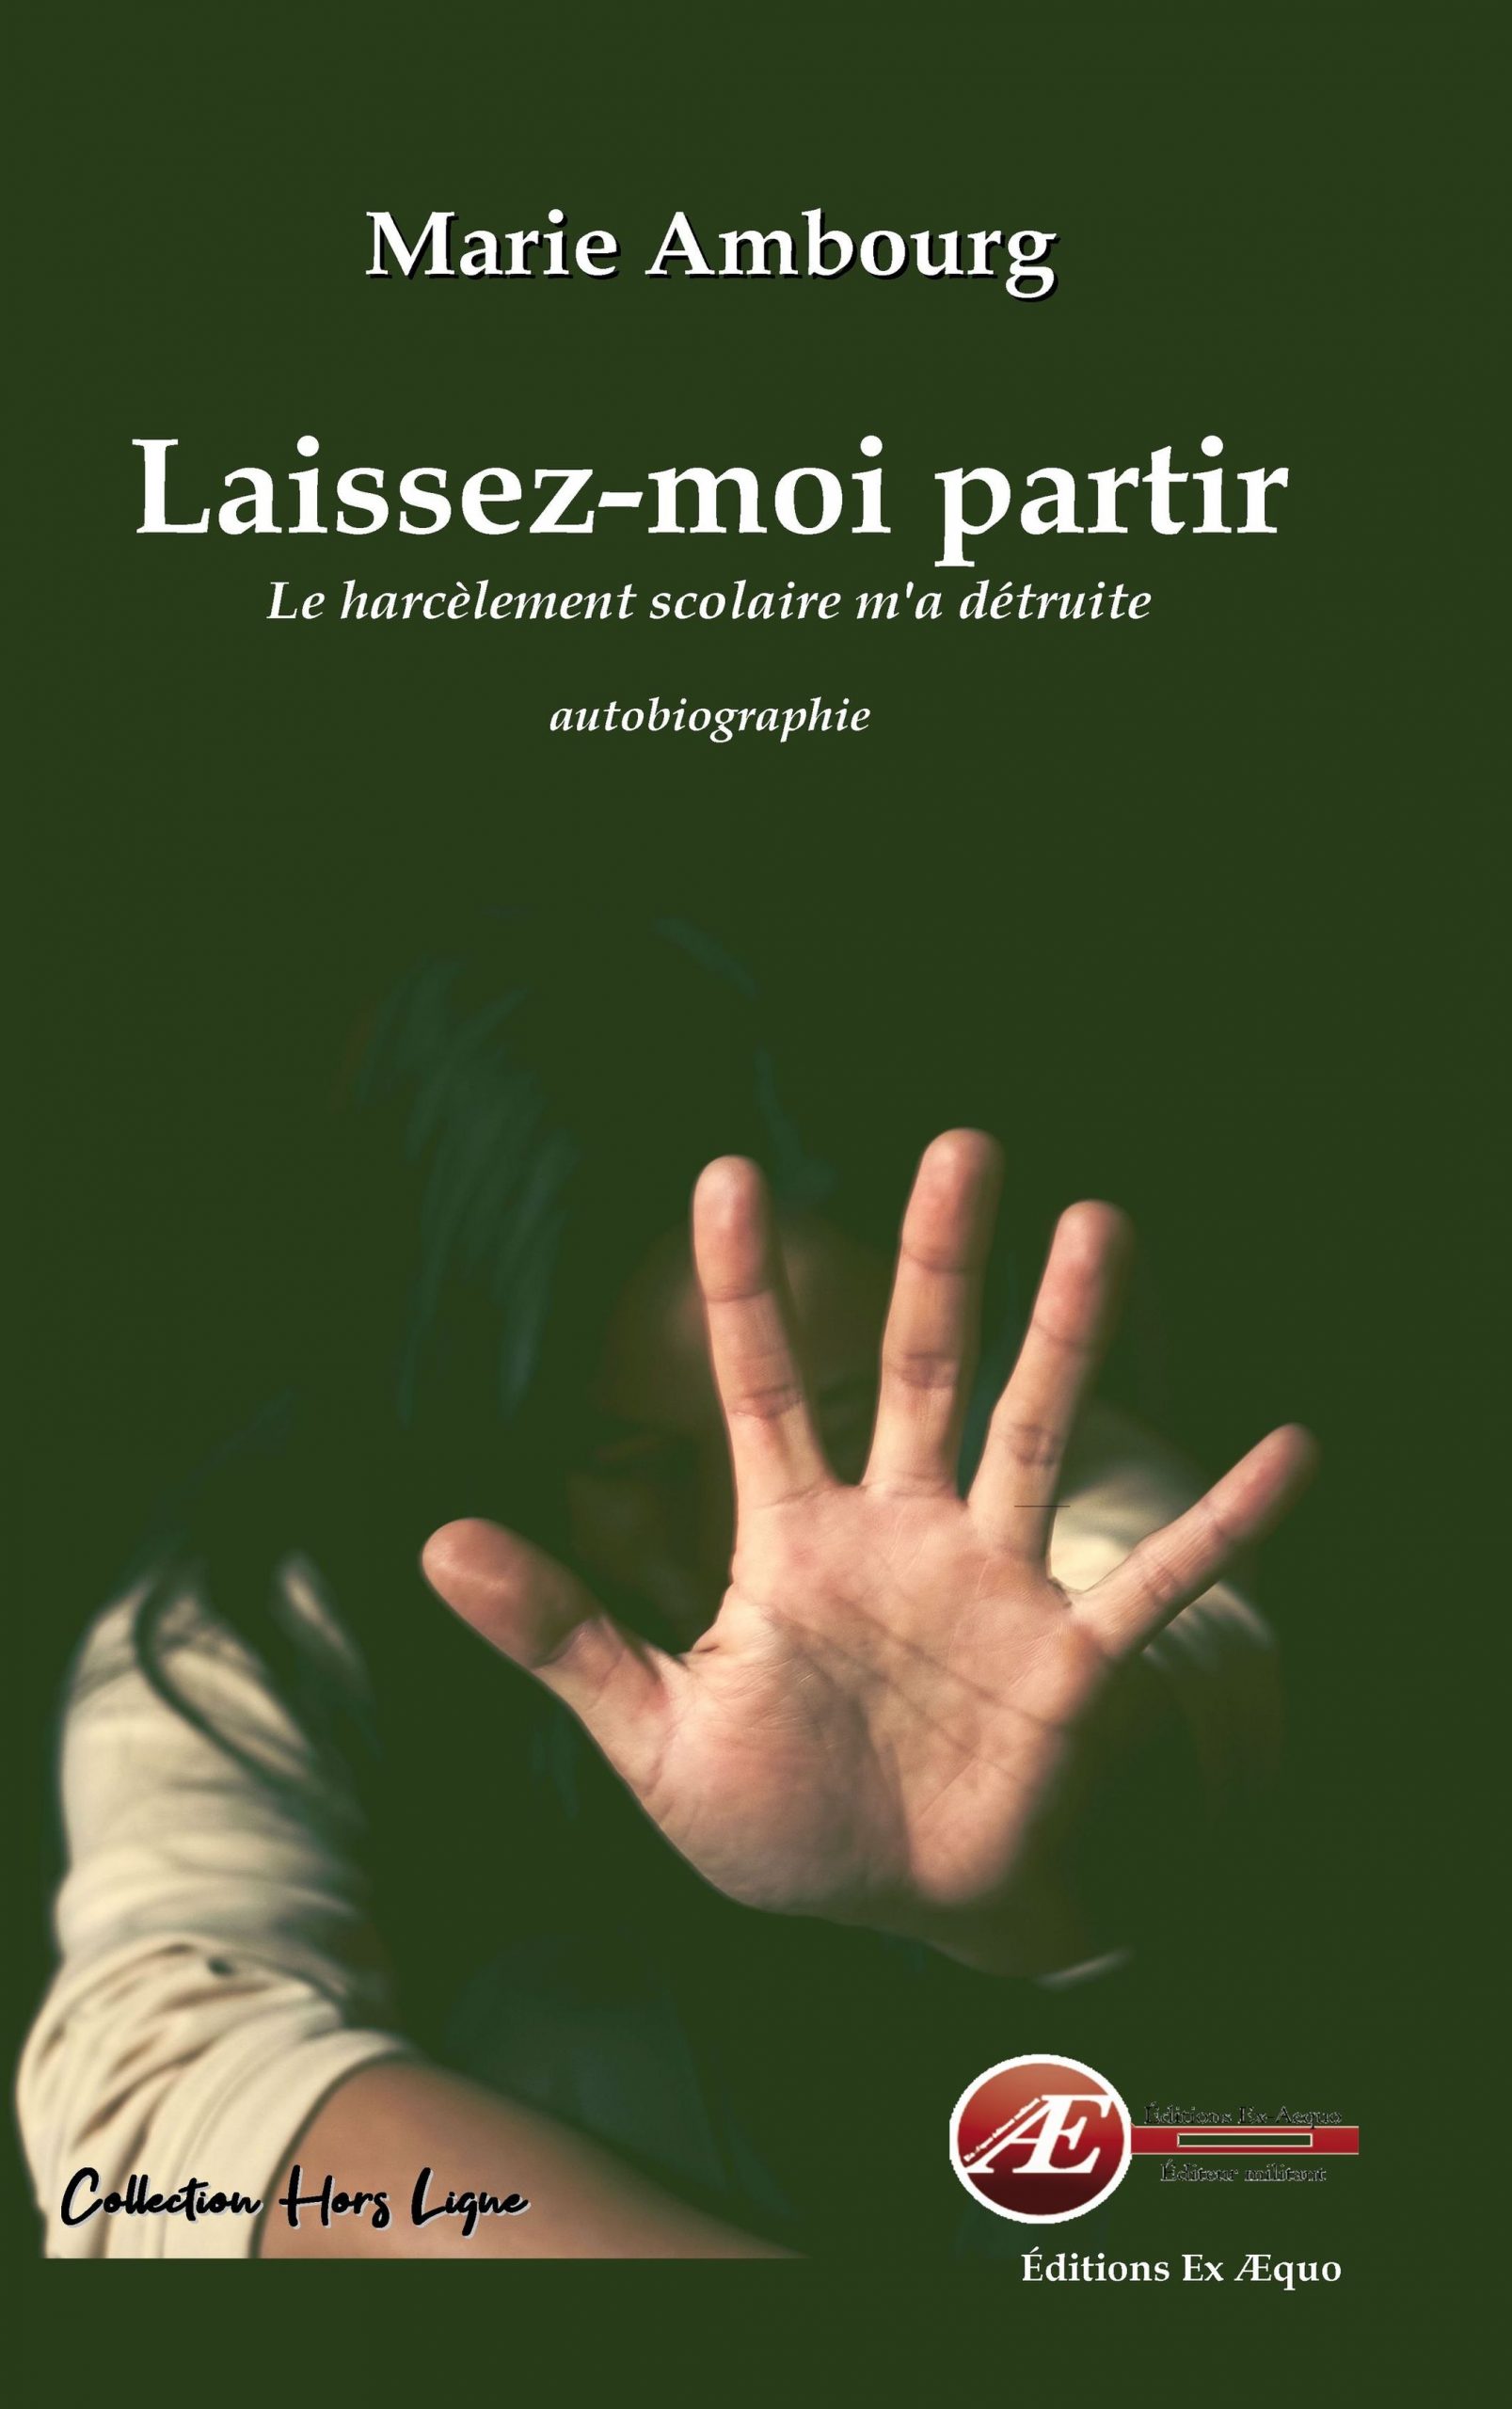 You are currently viewing Laissez-moi partir, de Marie Ambourg